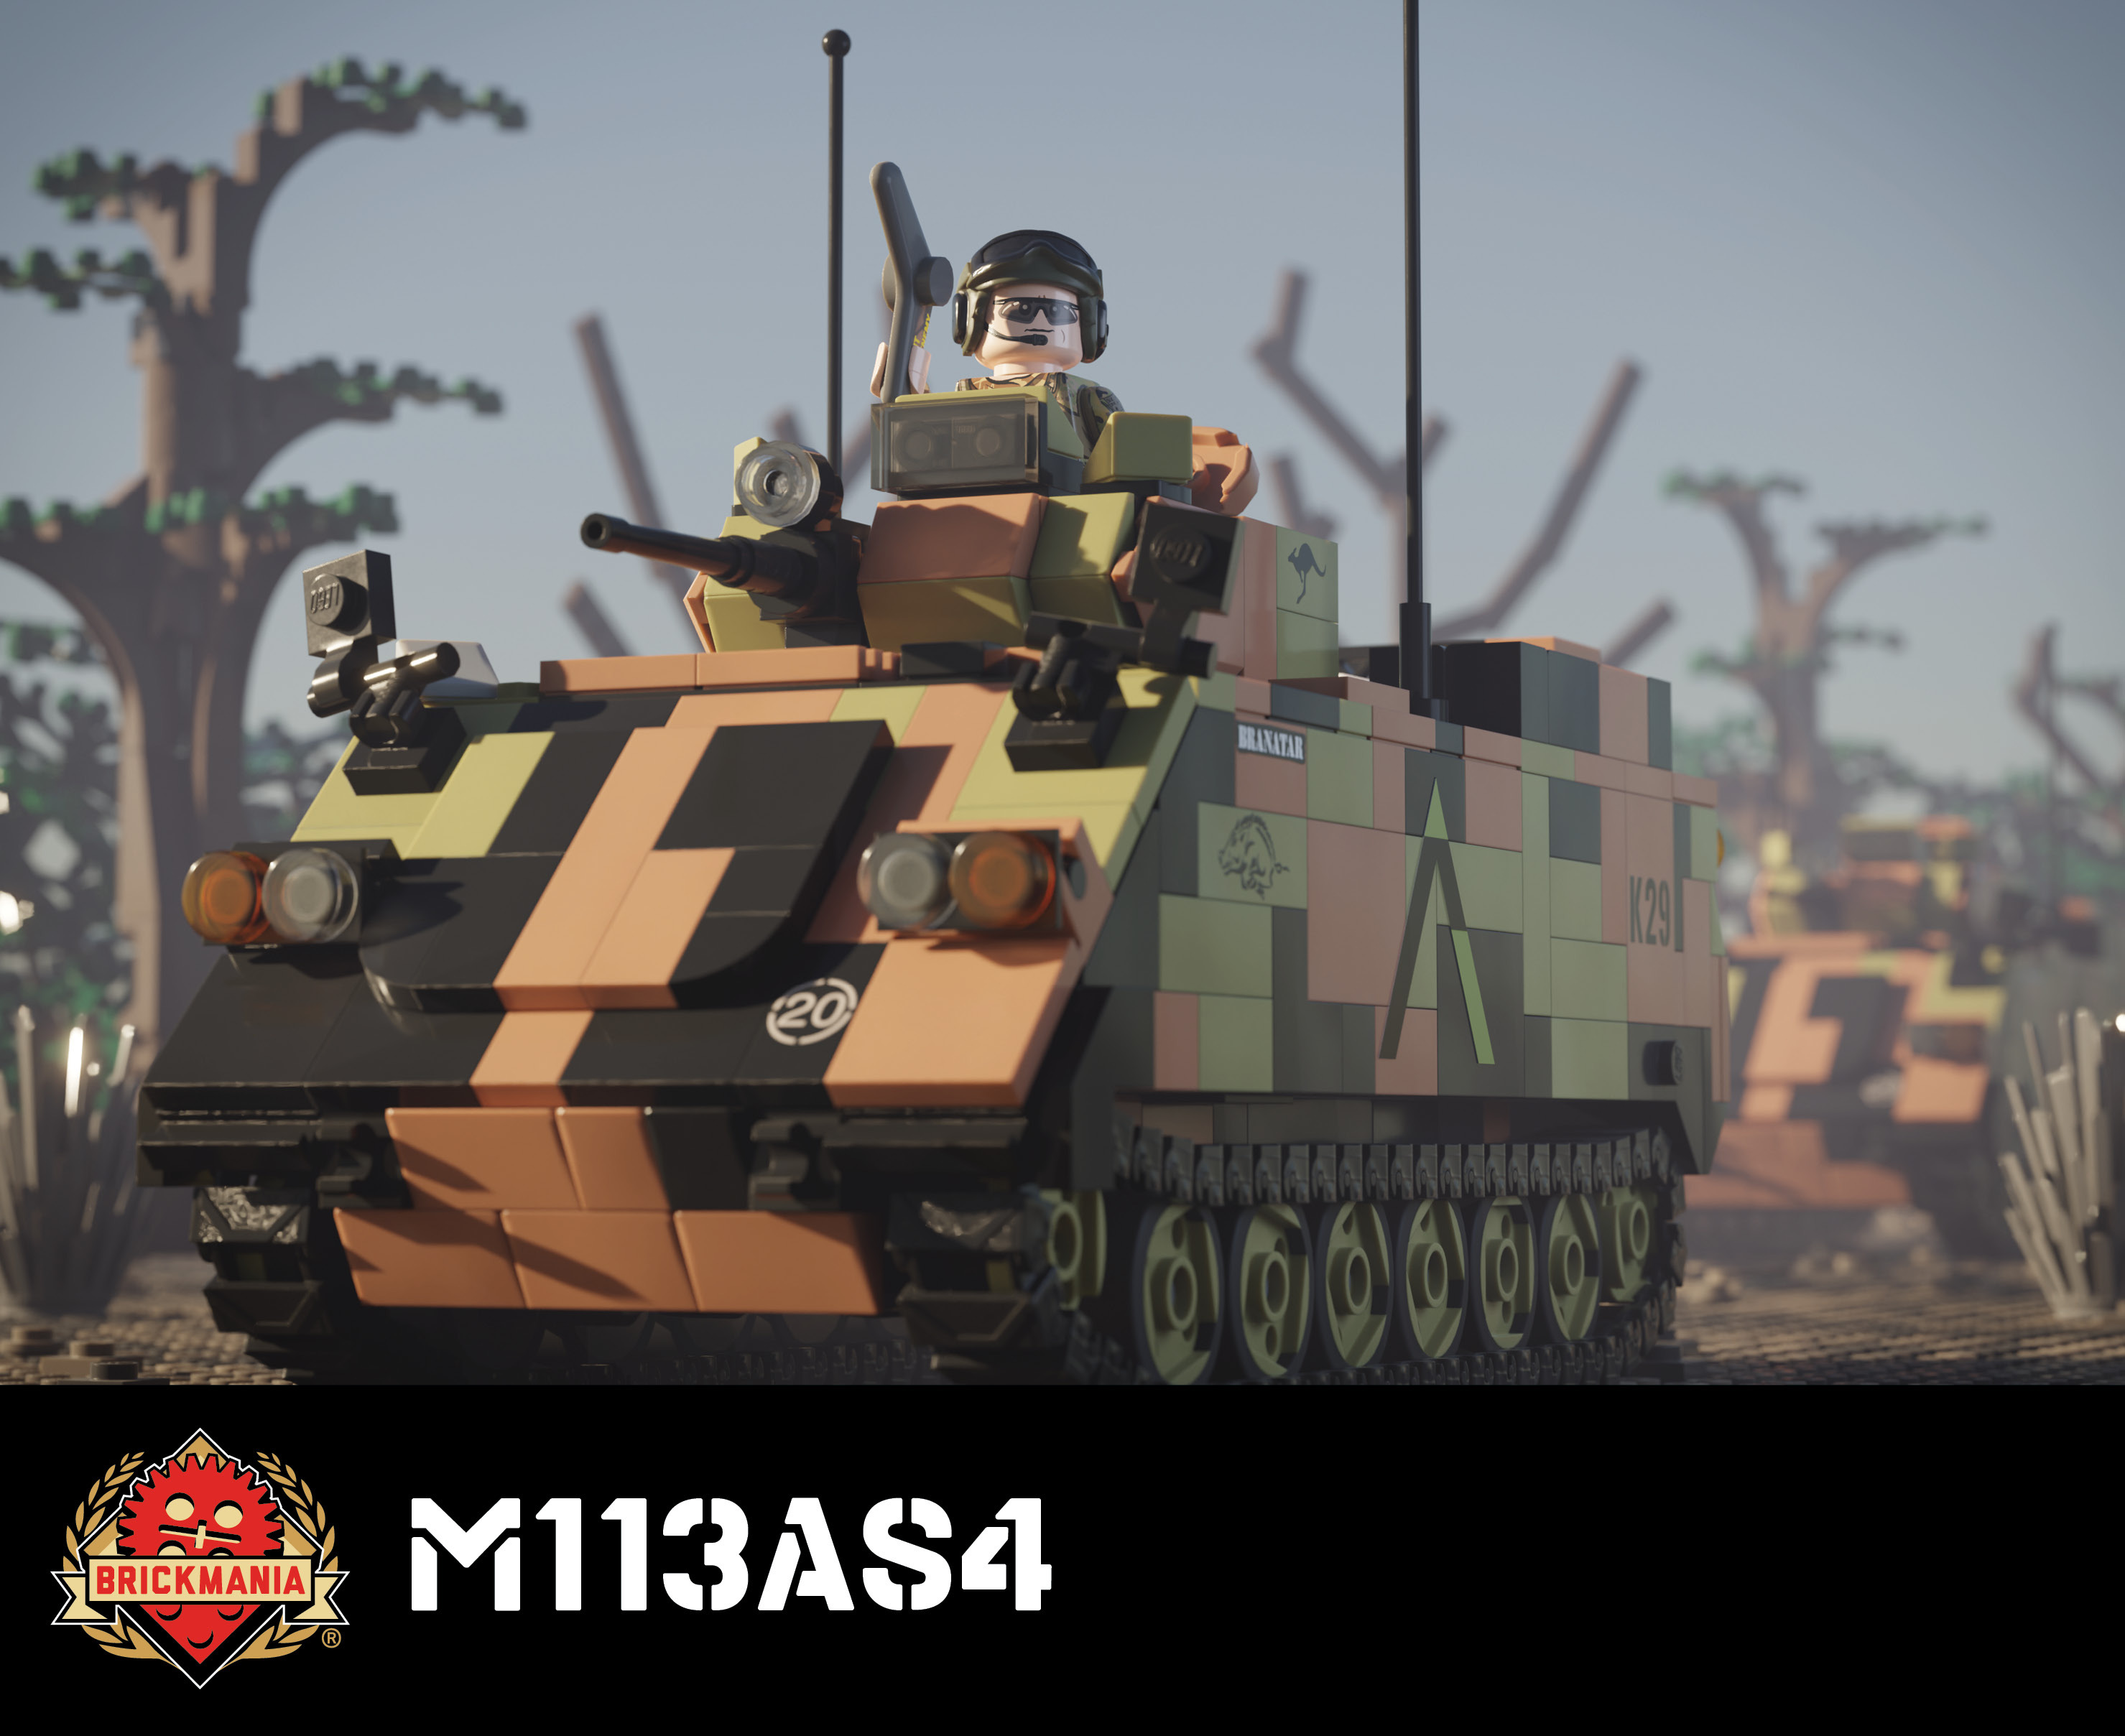 M113AS4 – Australian Armored Personnel Carrier